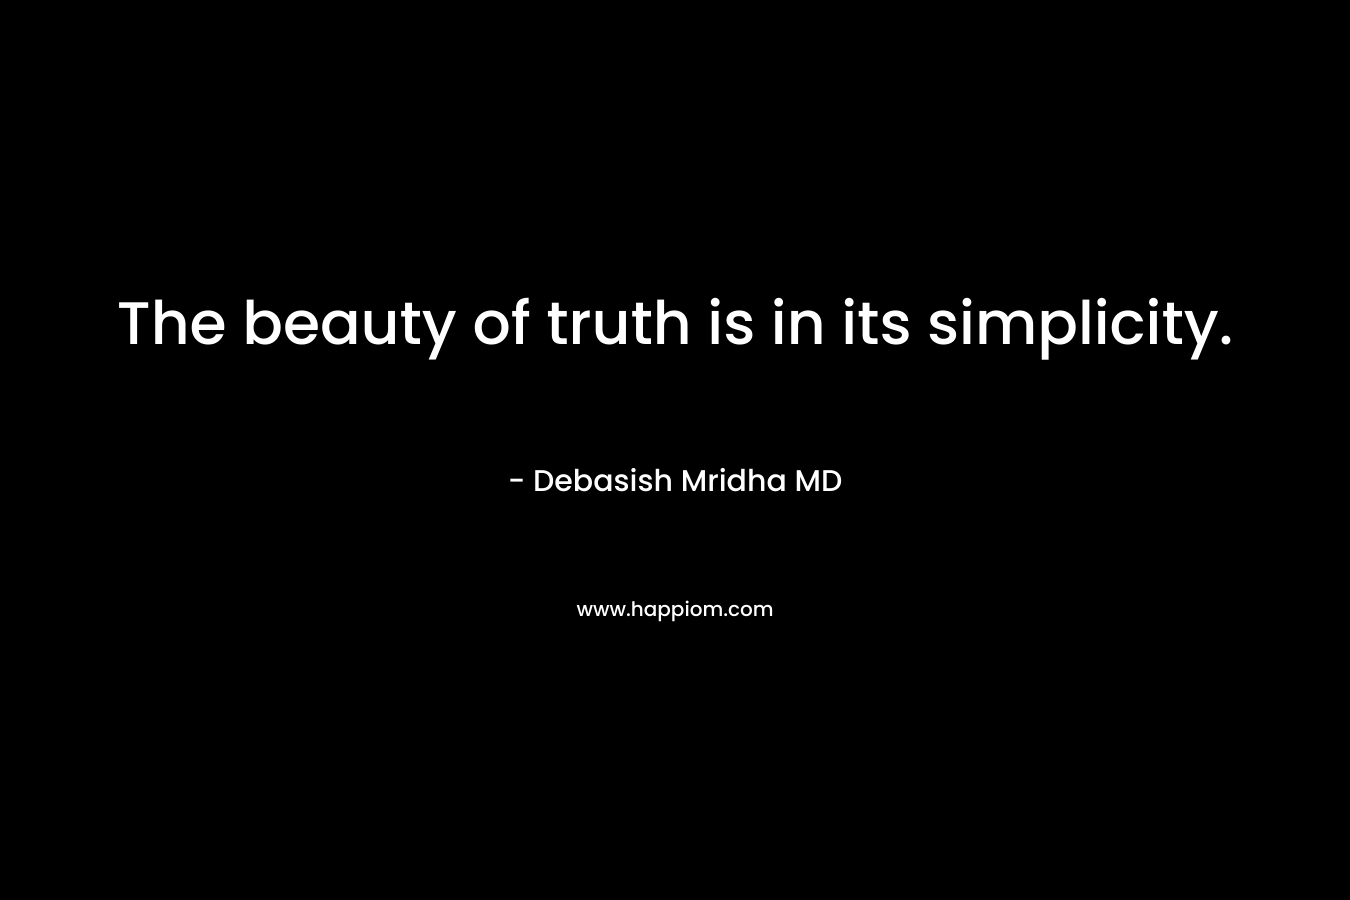 The beauty of truth is in its simplicity.